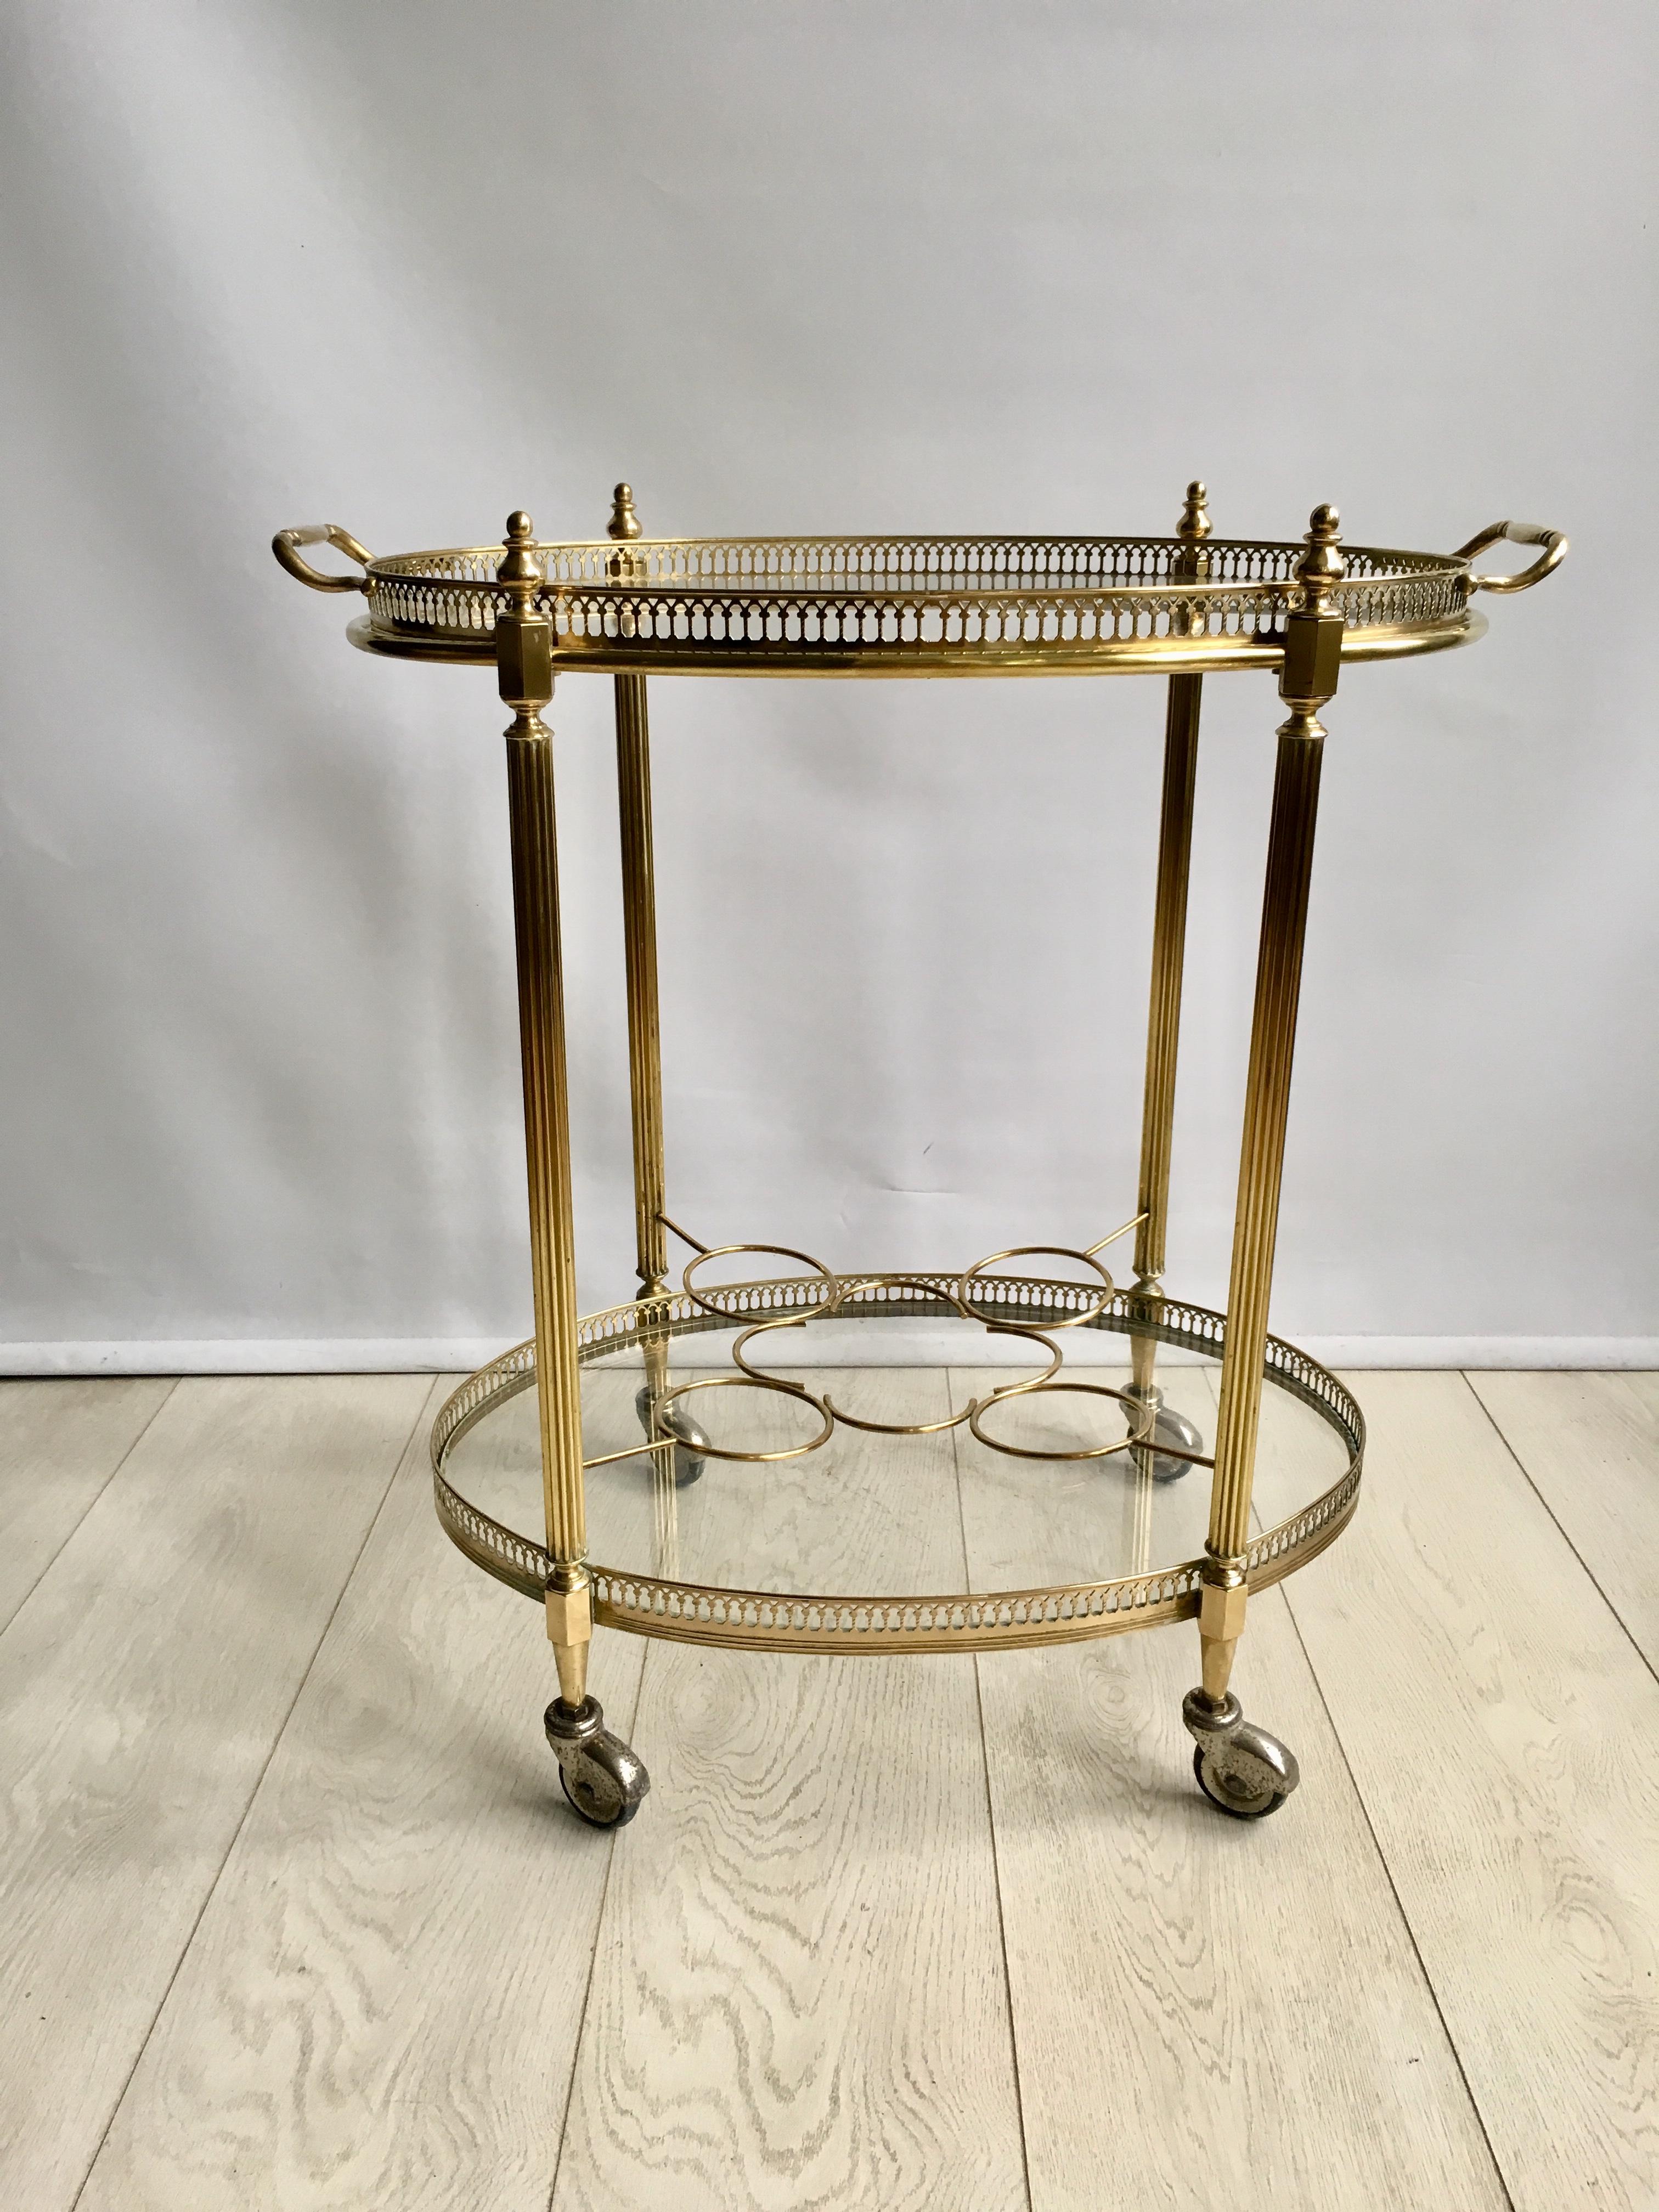 Attractive vintage drinks trolley from France, circa 1950.

Polished brass frame with lift off top tray and bottle holder to lower tier (can be removed)

Perfect for smaller spaces.

Overall dimensions: 61 cm wide, 40.5 cm deep and 65 cm tall